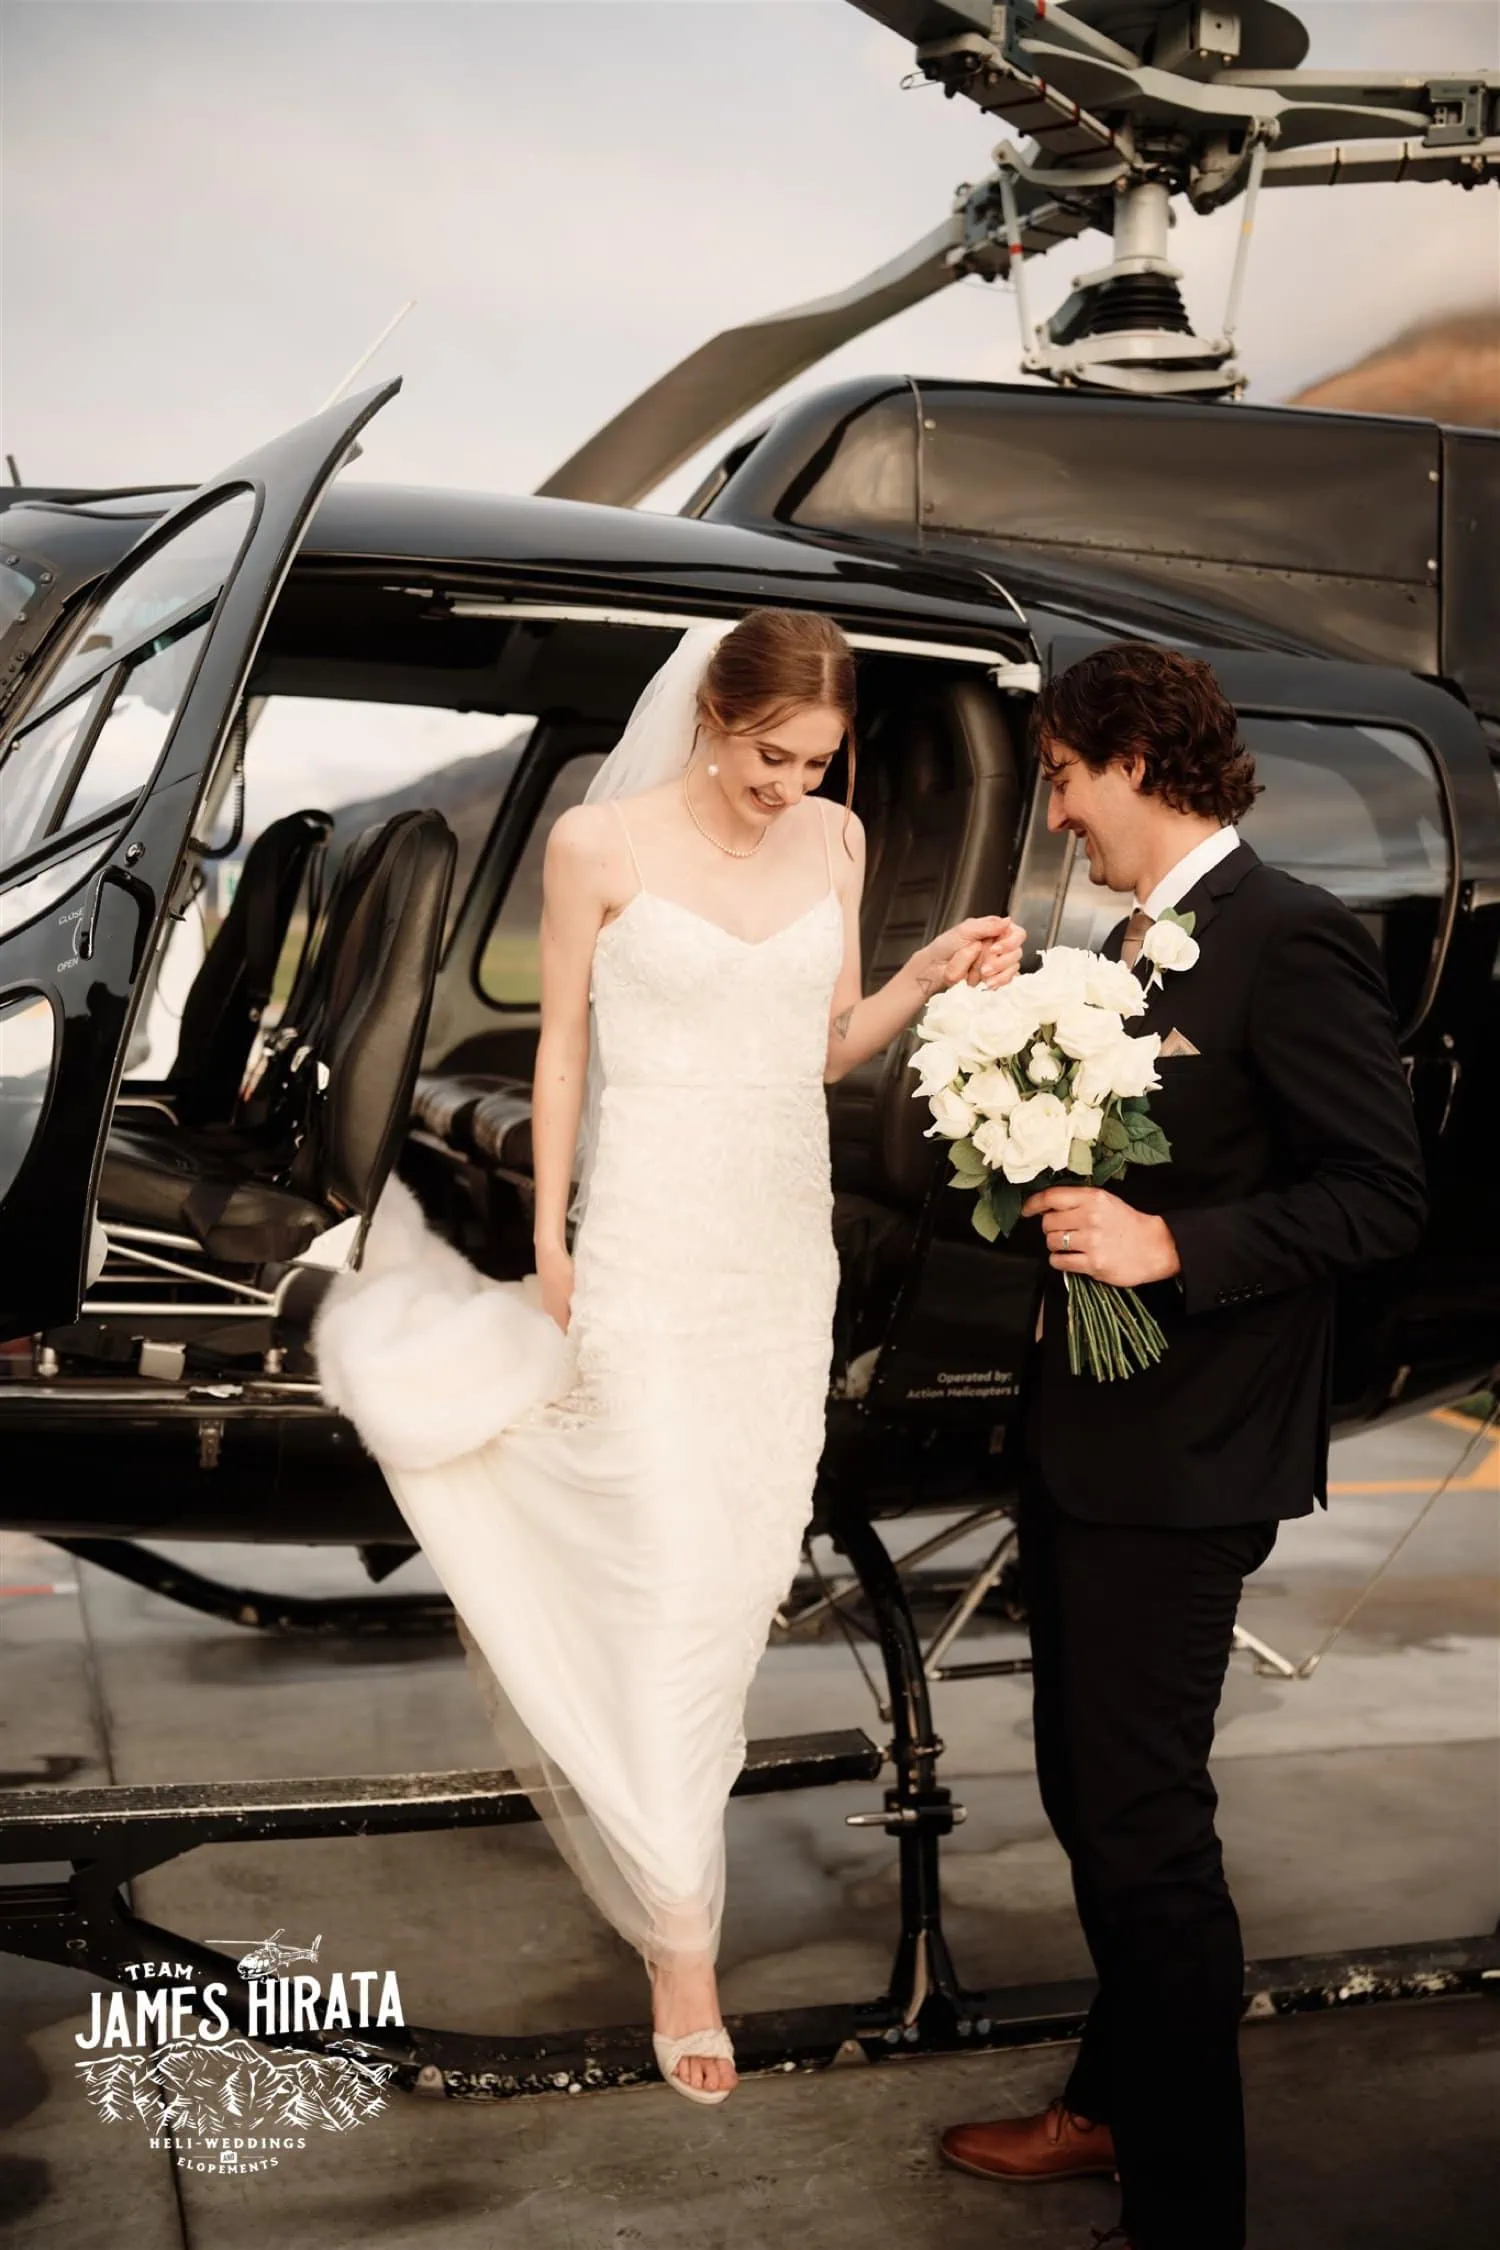 Hannah and Ross' elopement wedding in Queenstown, New Zealand includes a helicopter exit.